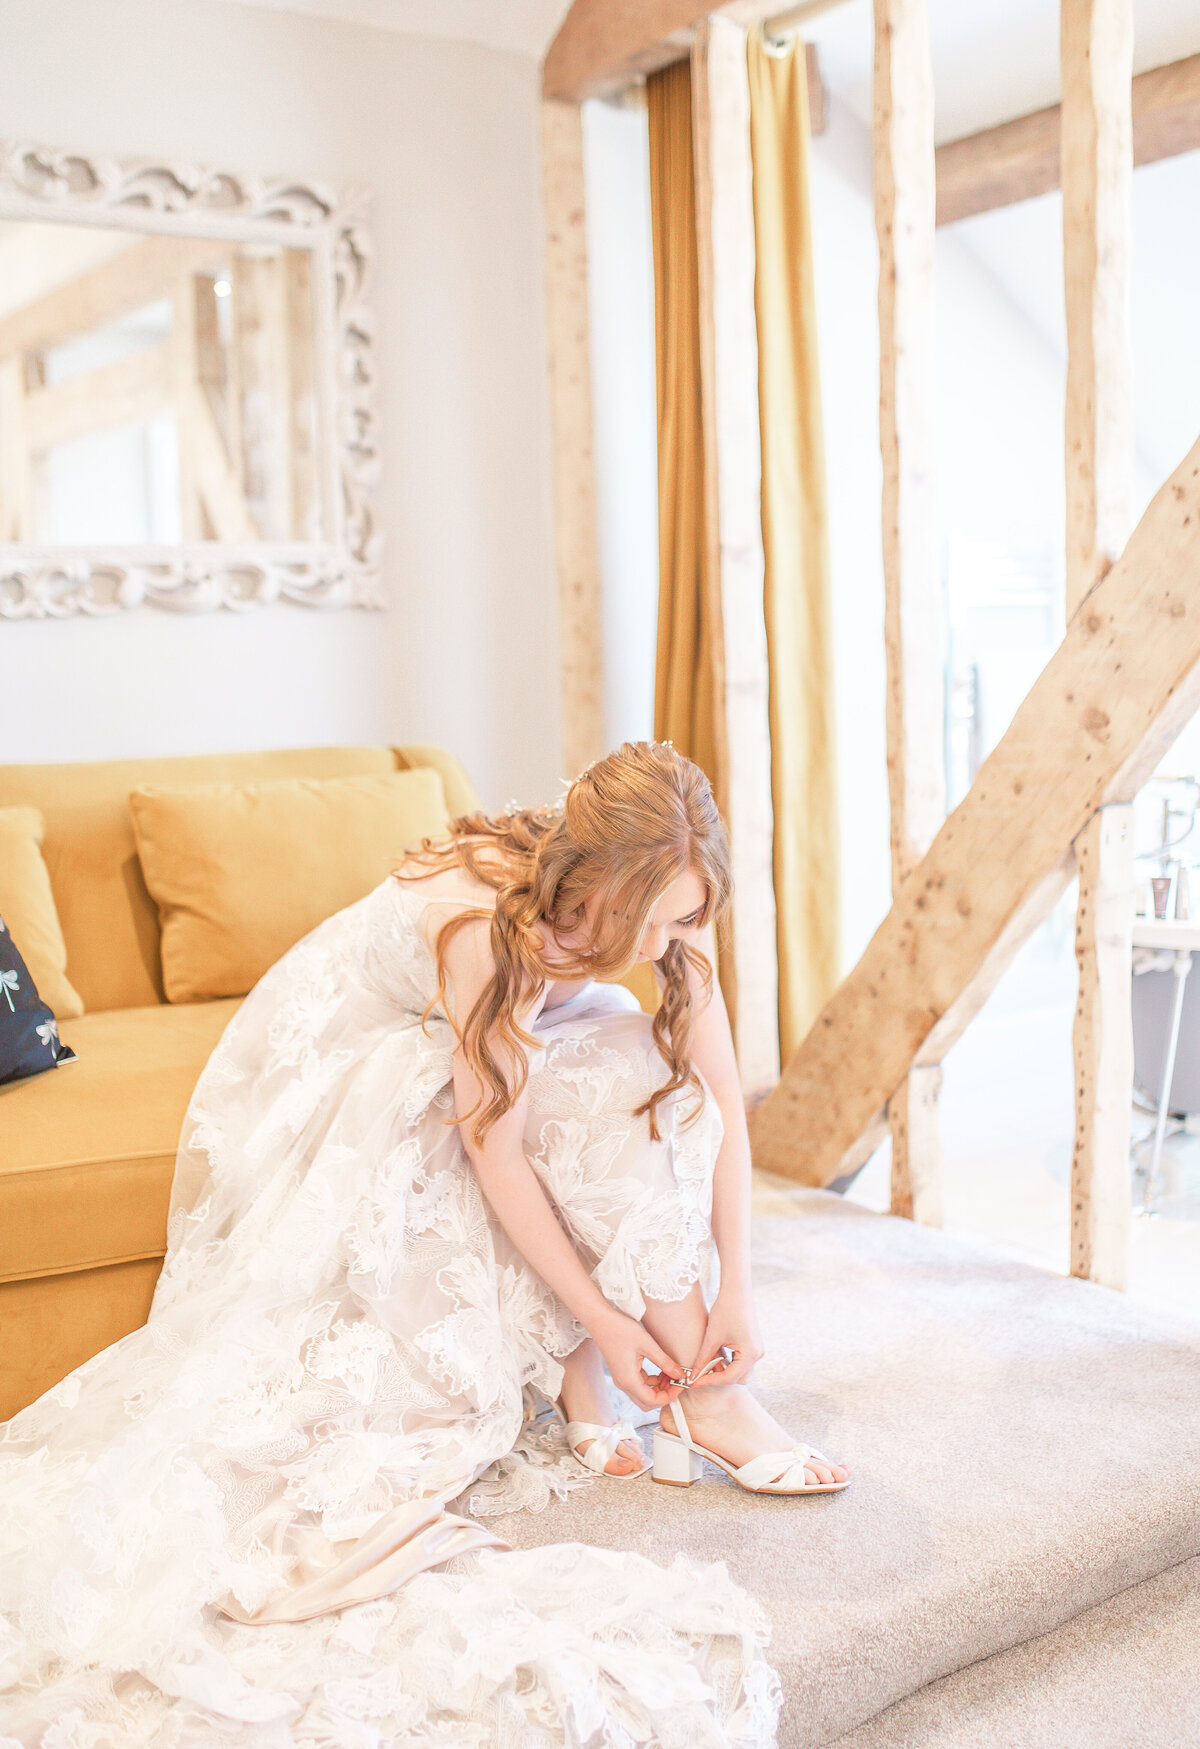 Bride sat down in wedding dress putting on shoes